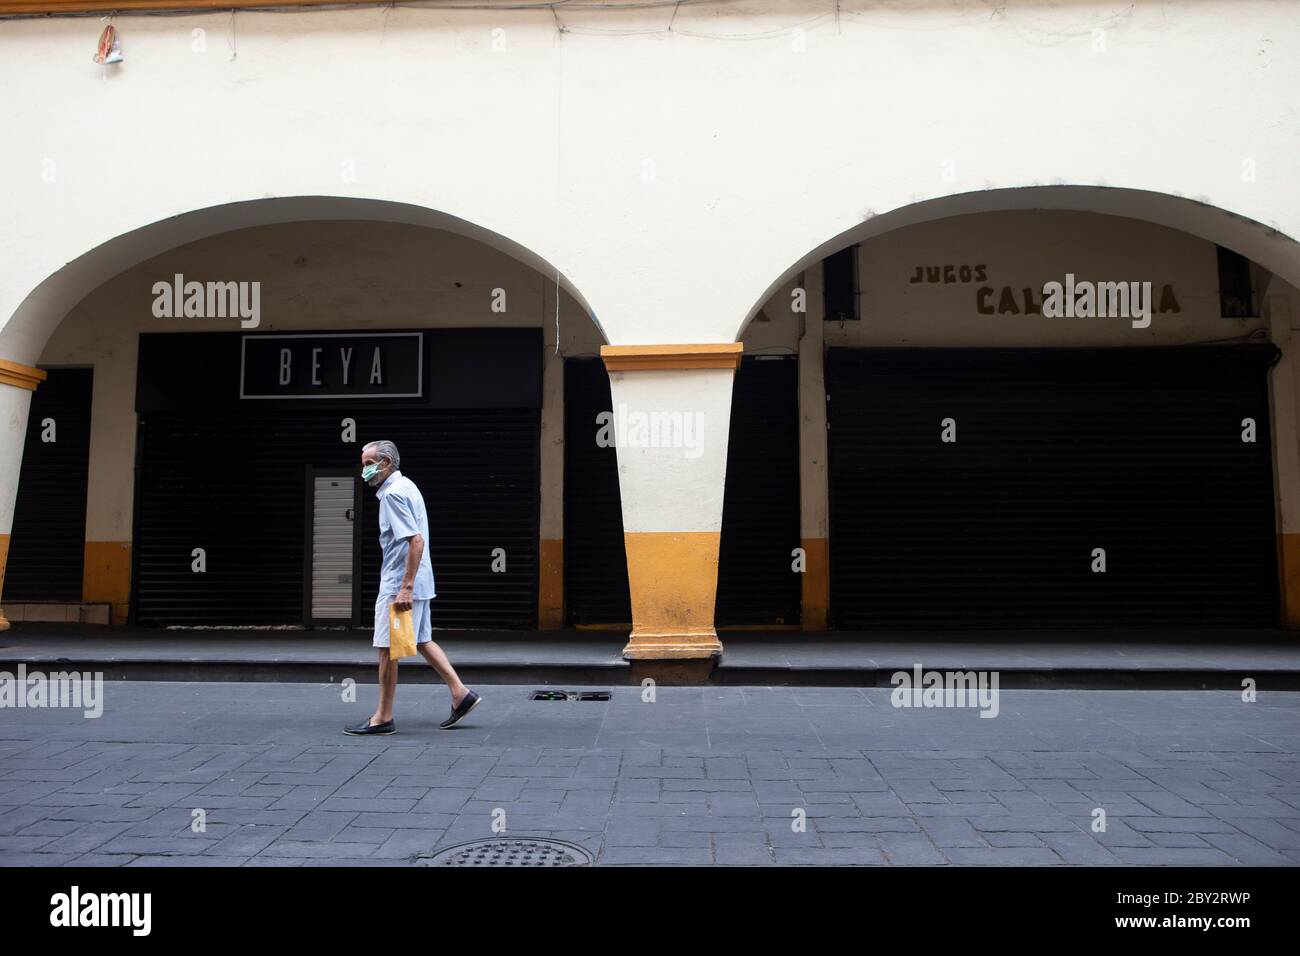 Cuernavaca, Mexico. 8th June, 2020. A man wearing a face mask walks along a street in the center of Cuernavaca, Mexico, on June 8, 2020. Credit: Marco Diaz/Xinhua/Alamy Live News Stock Photo